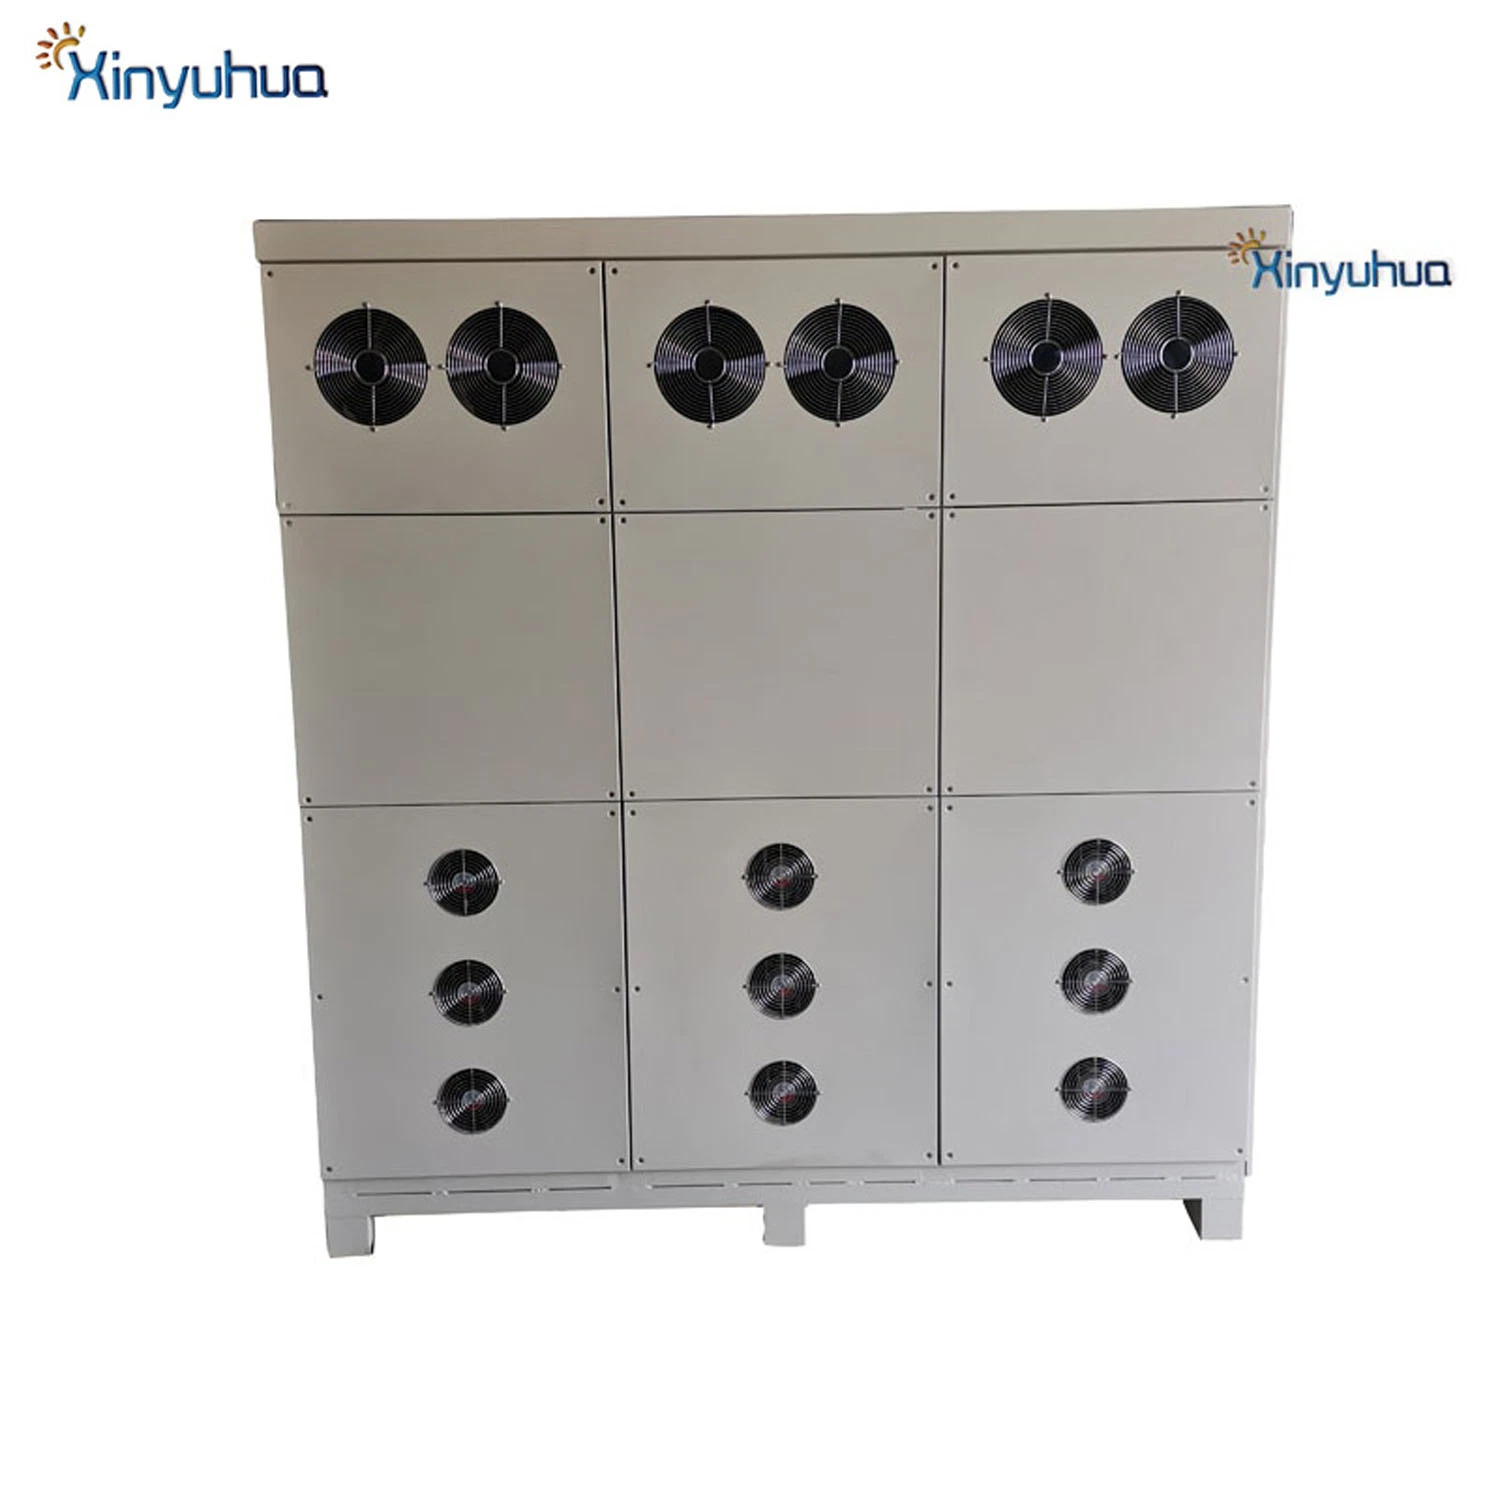 Xinyuhua Frequency Converter VFD AC Motor Drive Speed Controller 380V 11kw--15kw